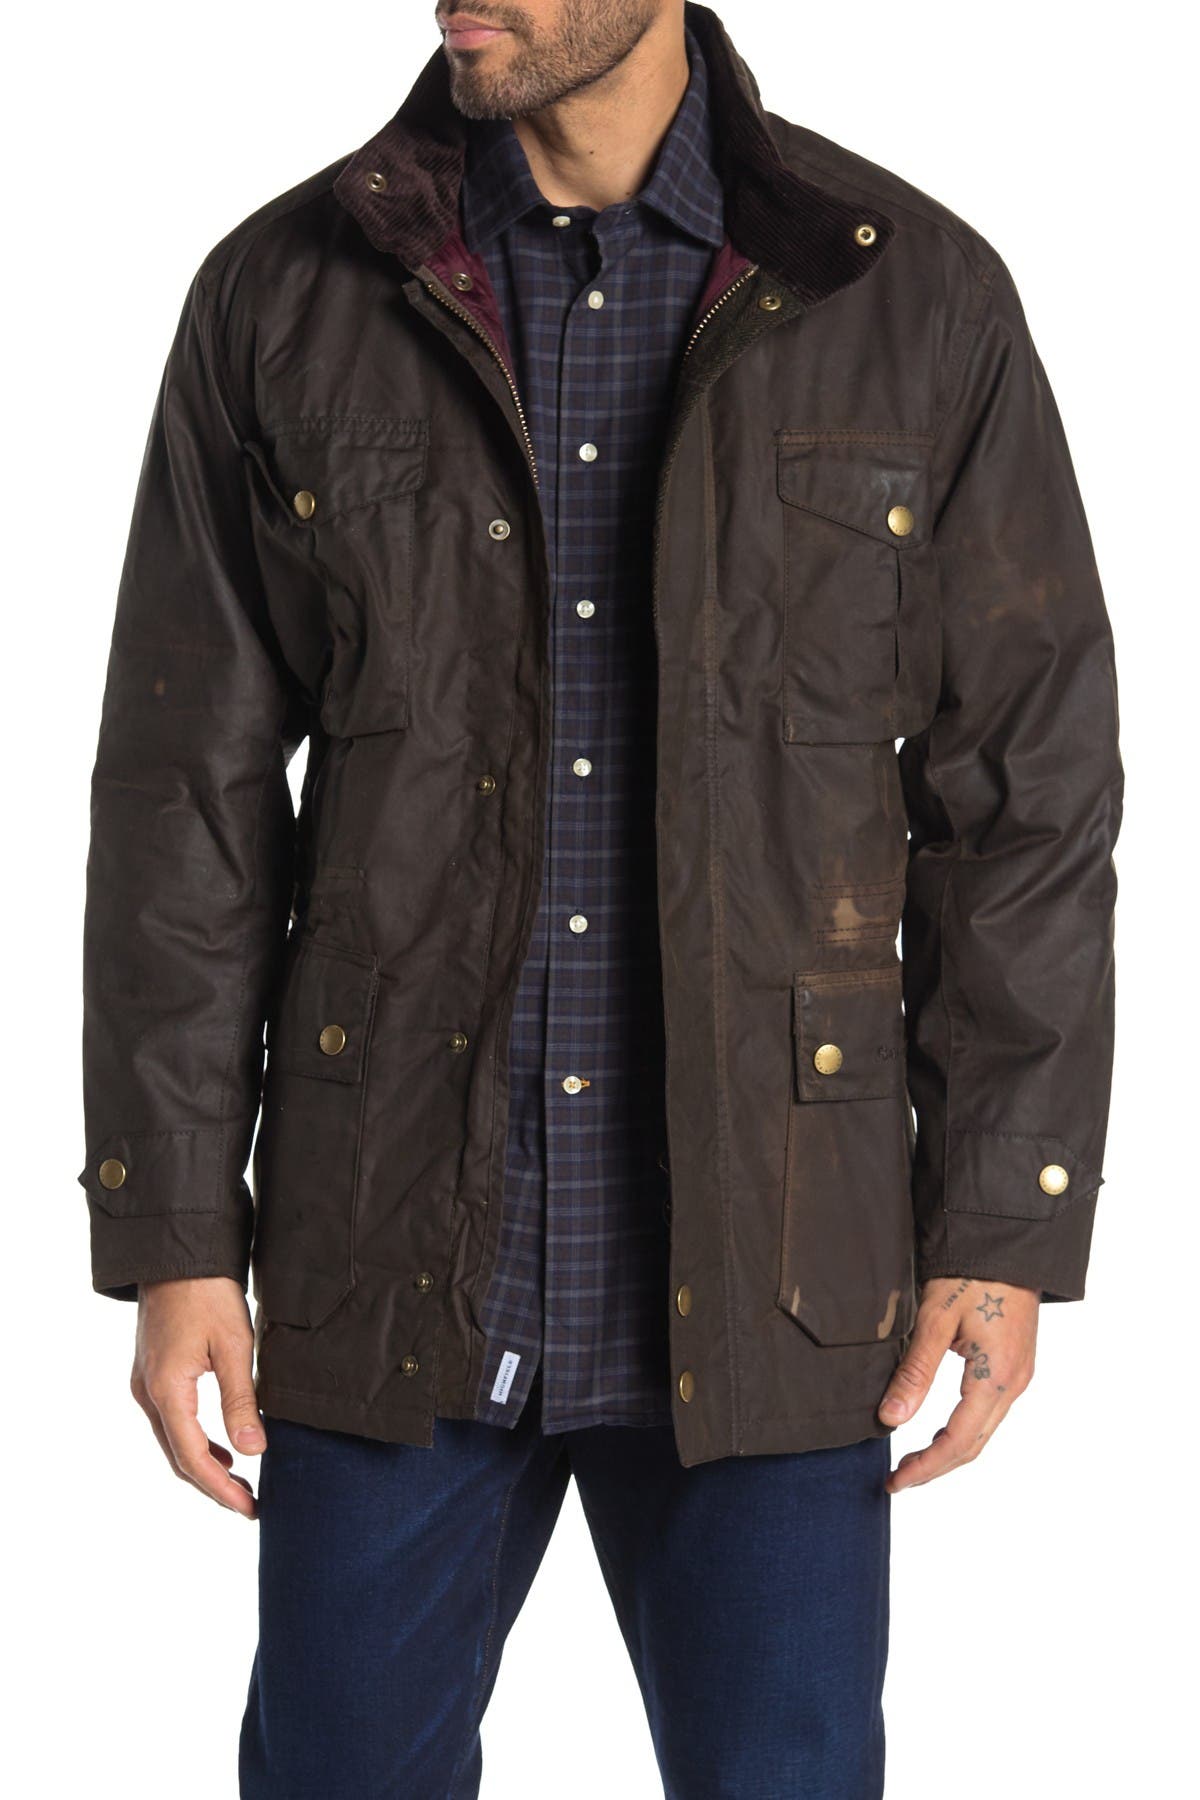 Barbour | Newcastle Wax Covered Jacket 